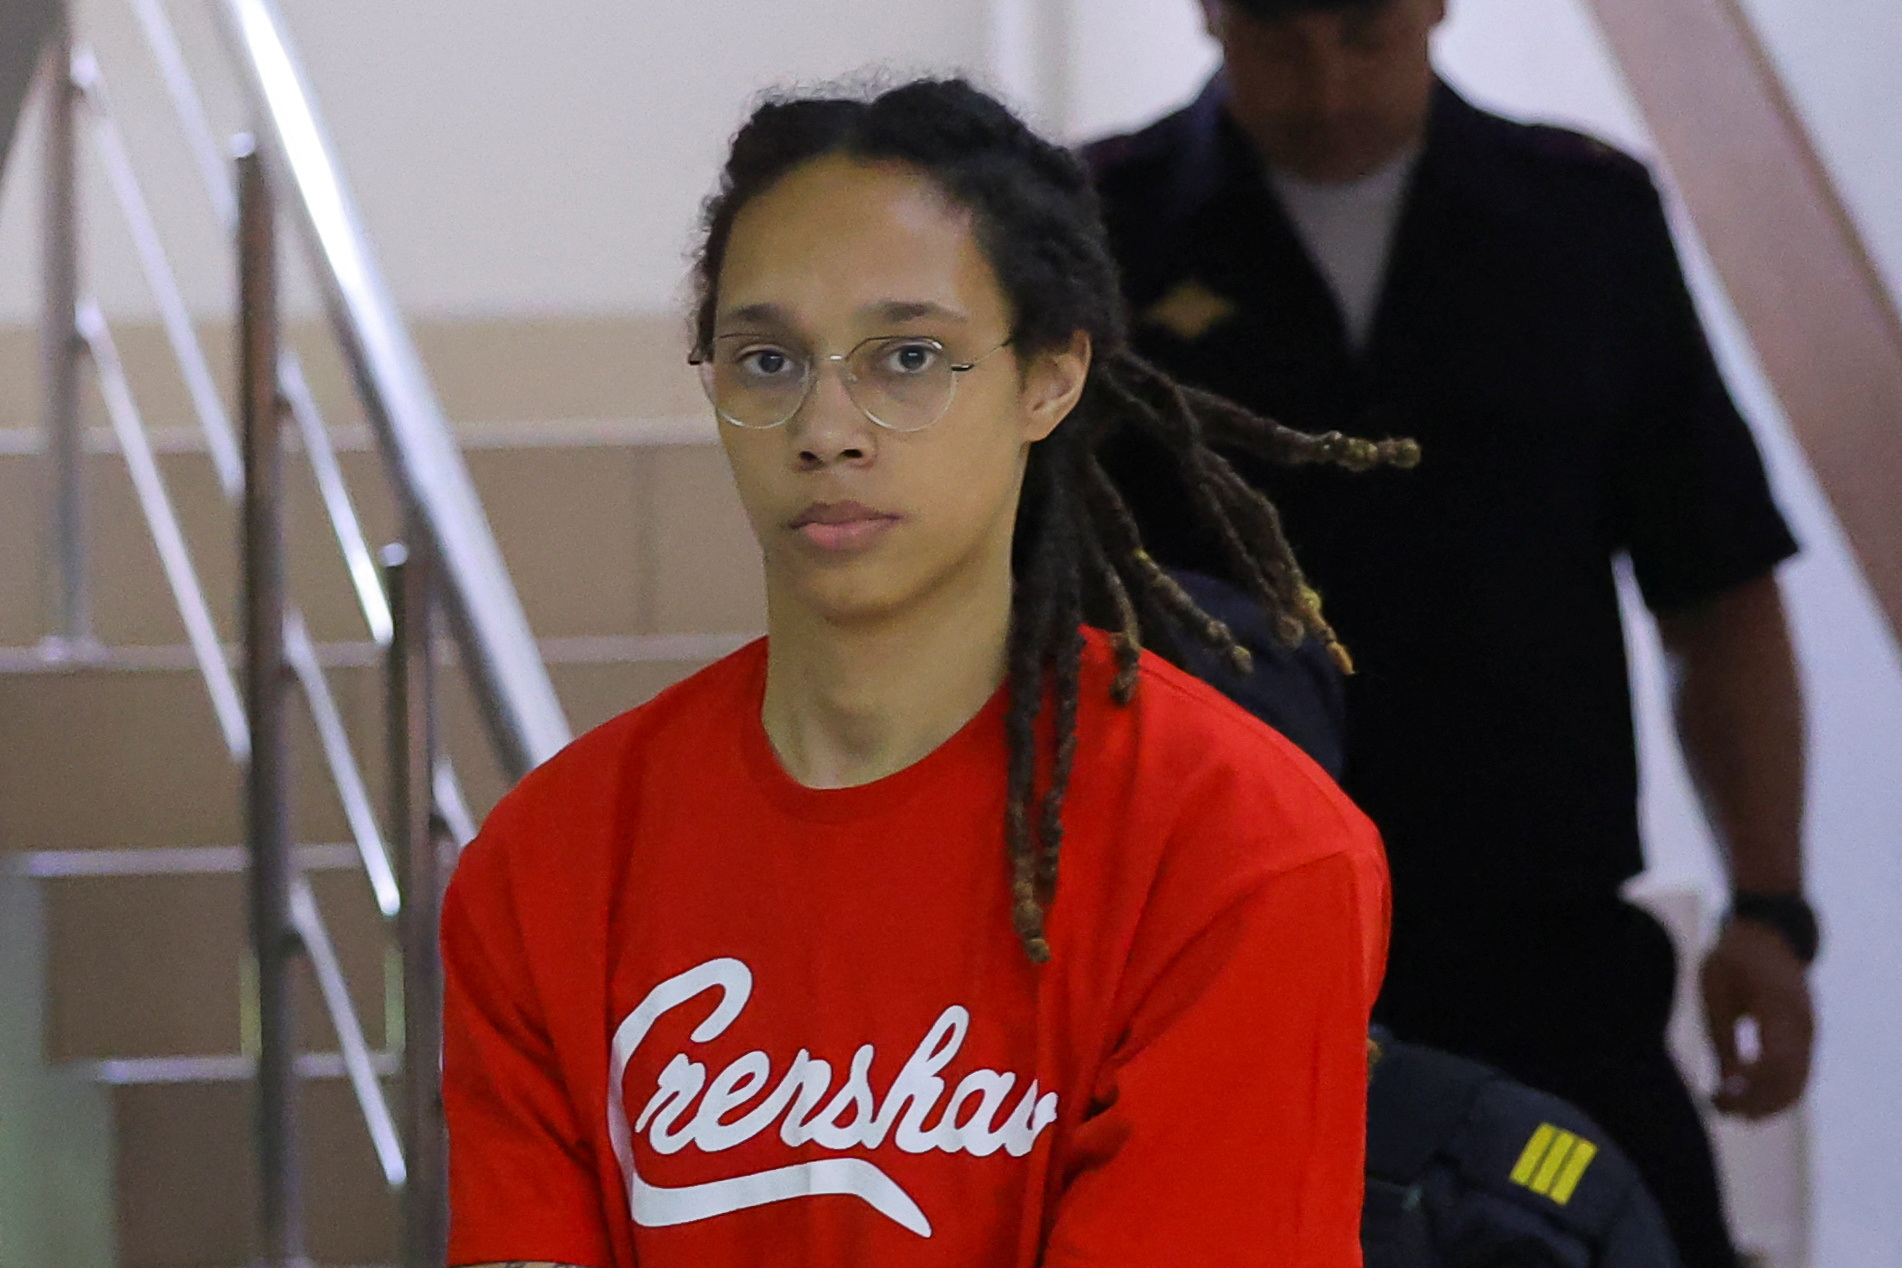 PHOTO: U.S. basketball player Brittney Griner, who was detained in March at Moscow's Sheremetyevo airport and later charged with illegal possession of cannabis, is escorted before a court hearing in Khimki, outside Moscow, Russia July 7, 2022.  